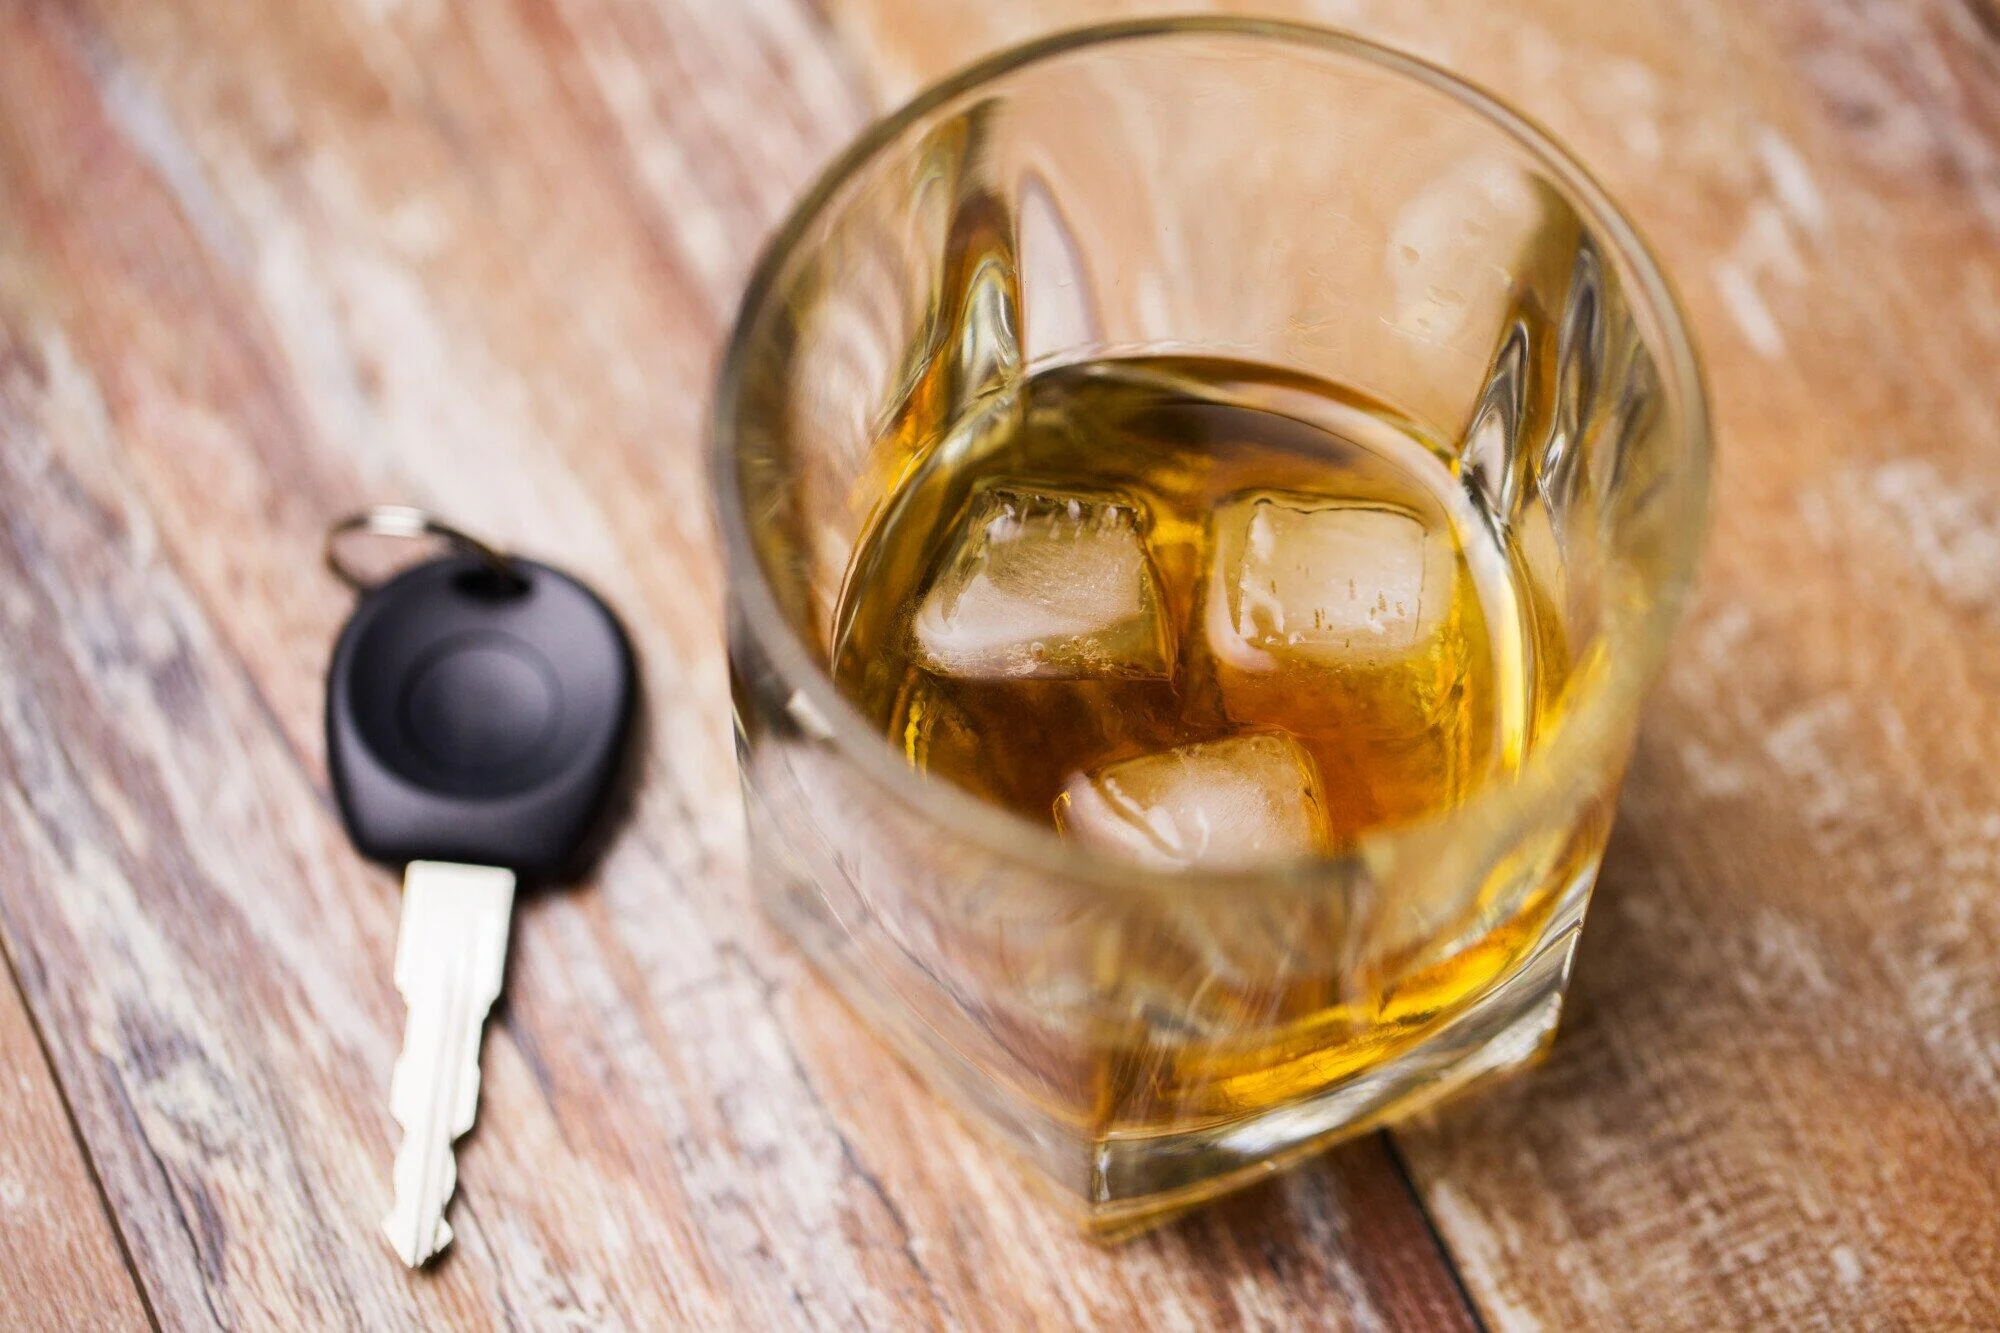 Understanding the Differences Between Misdemeanor DUI vs Felony DUI Charges